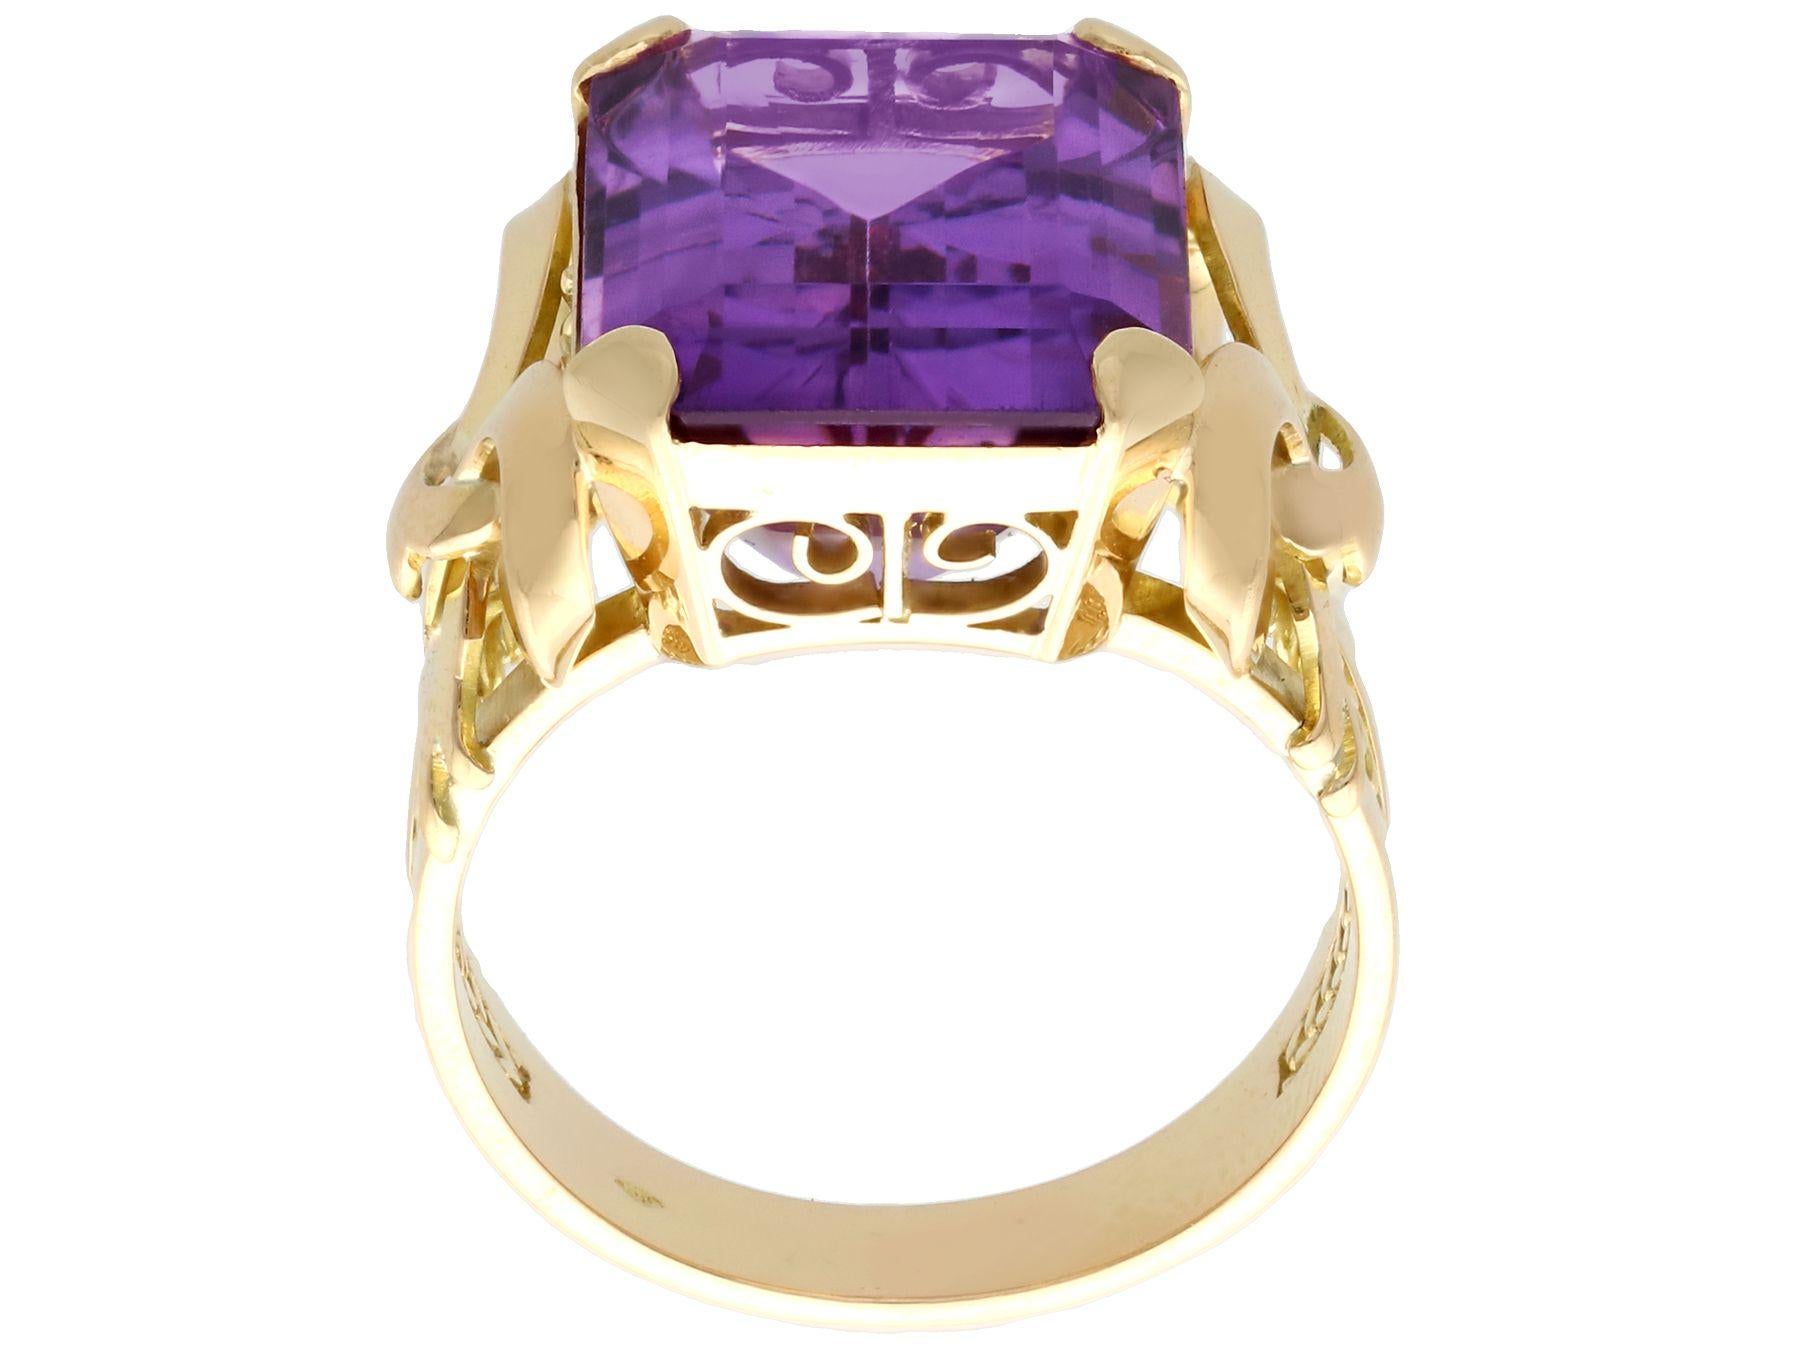 Women's or Men's 1940s, 11.34 Carat Emerald Cut Amethyst Yellow Gold Cocktail Ring